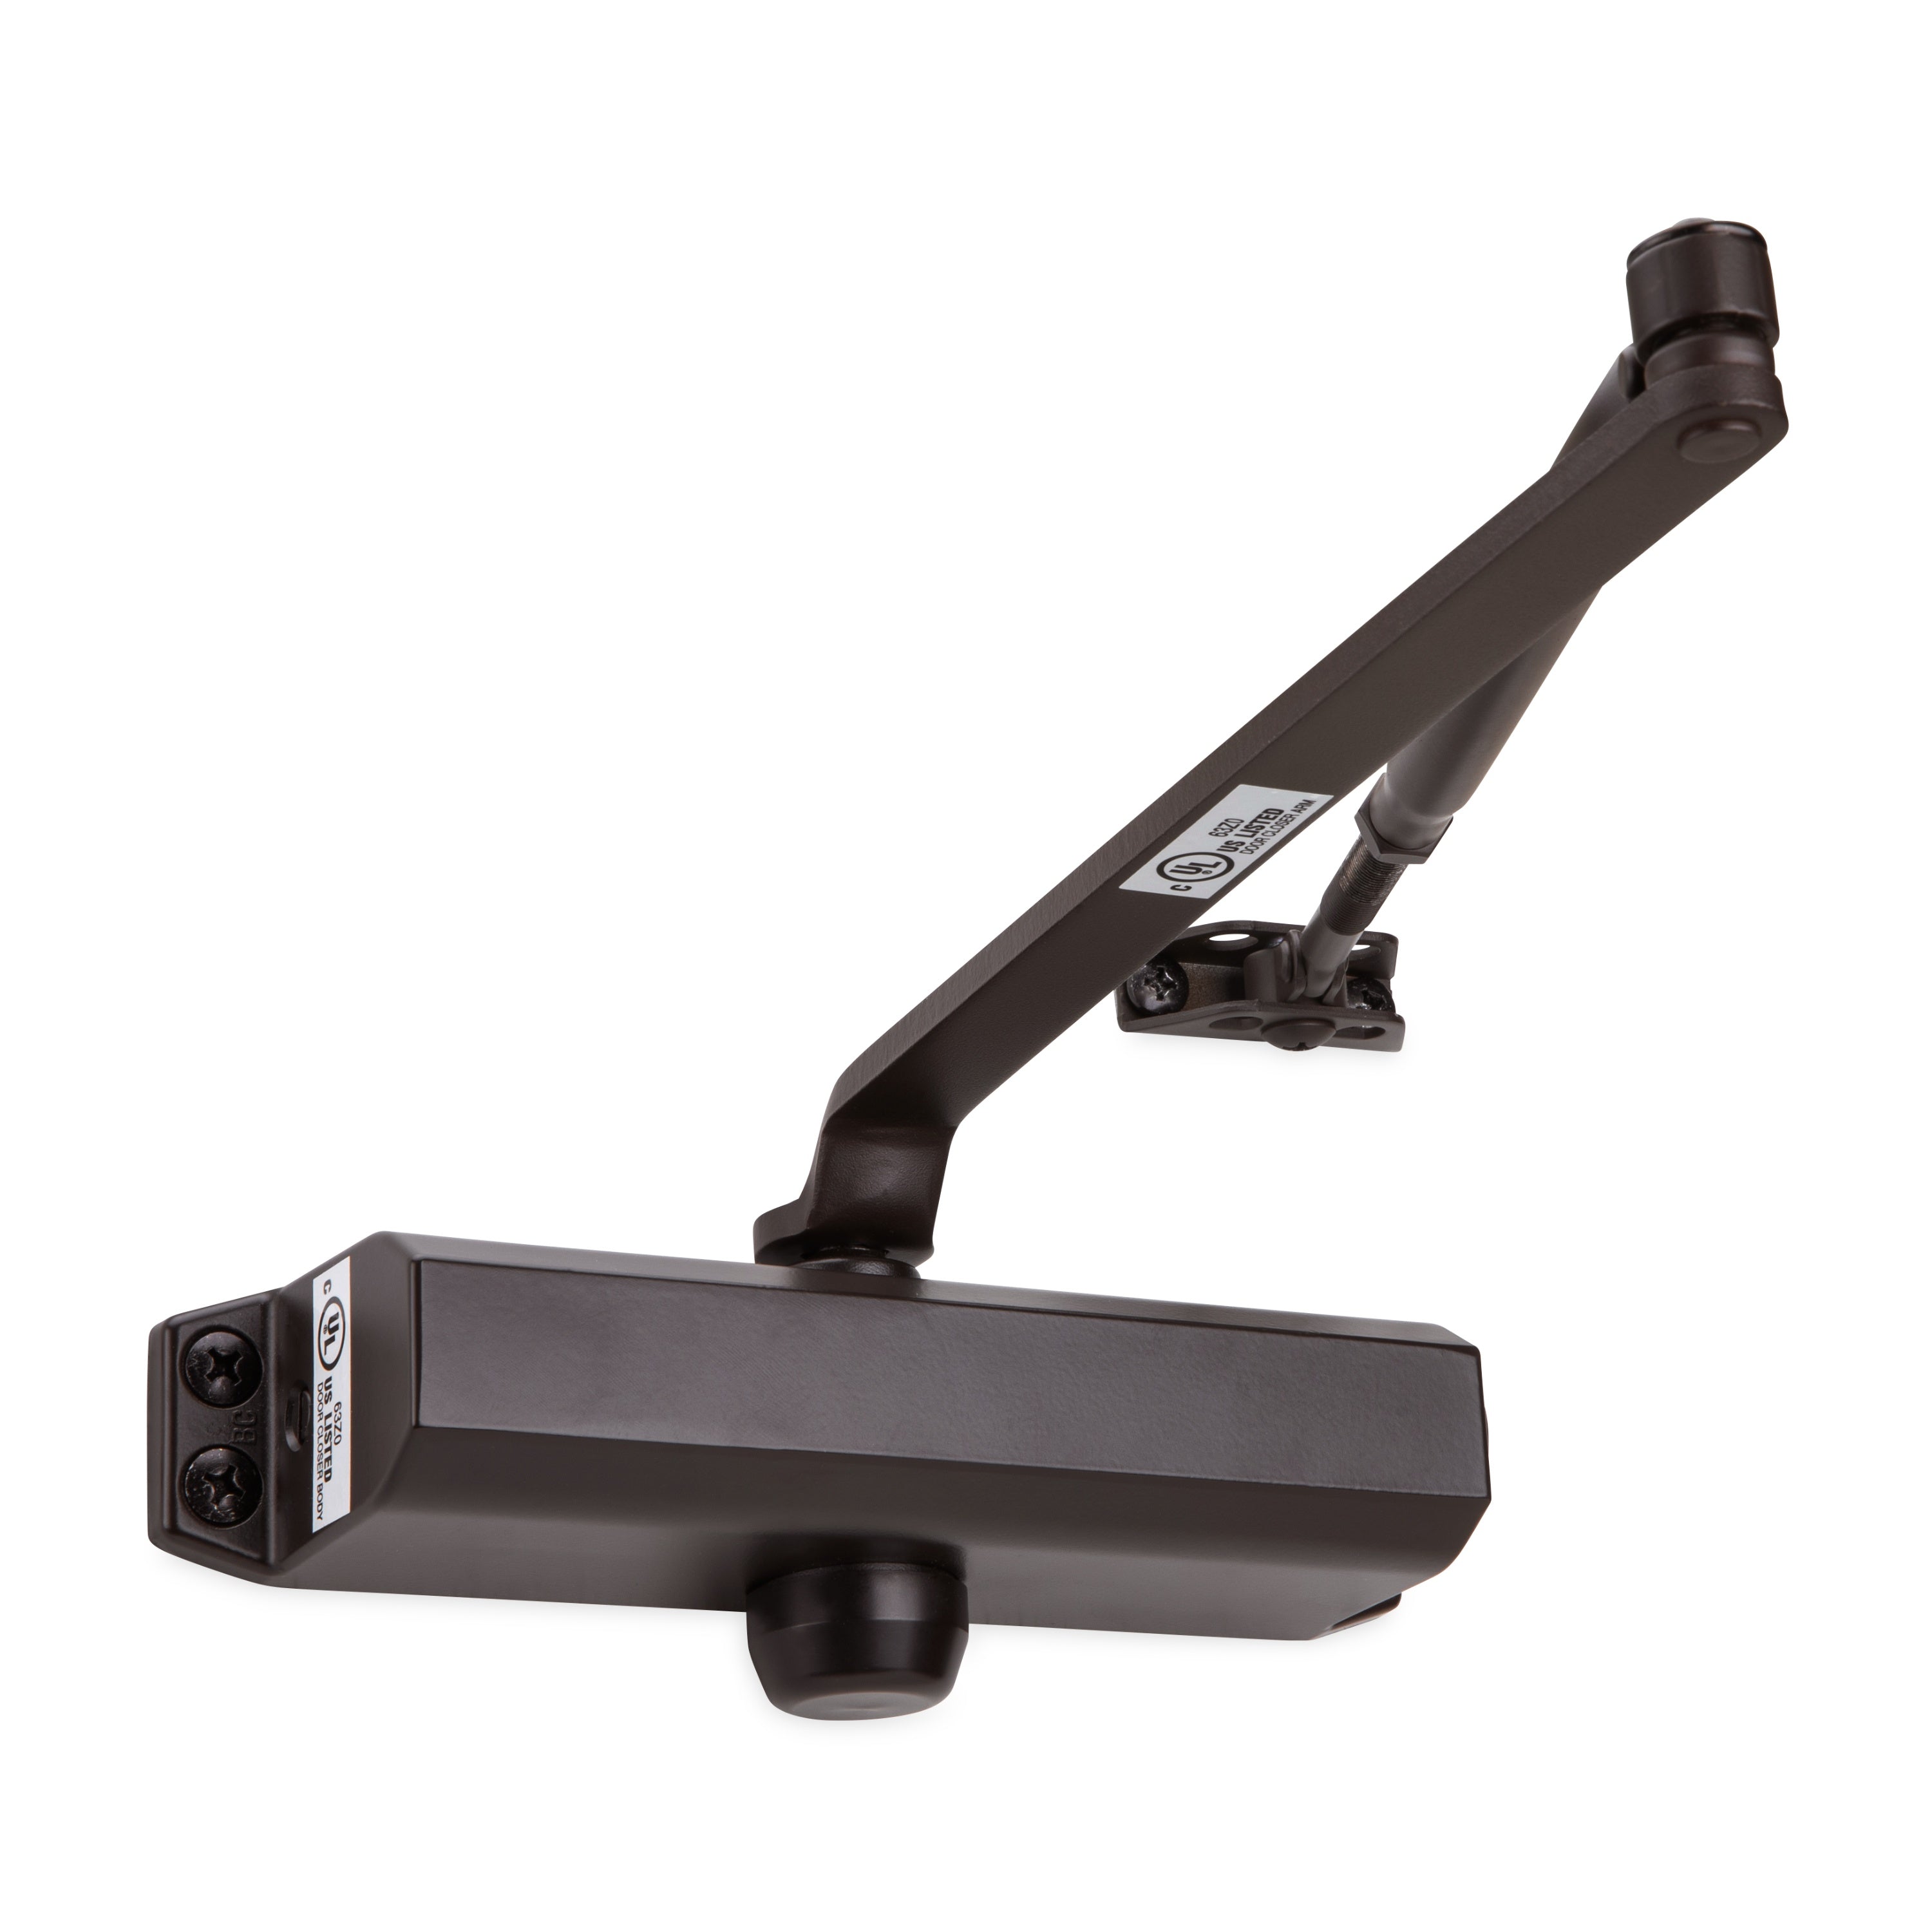 Grade 1 Tri-Packed Adjustable Streamline Door Closer with Backcheck -  Pro-Edge HD